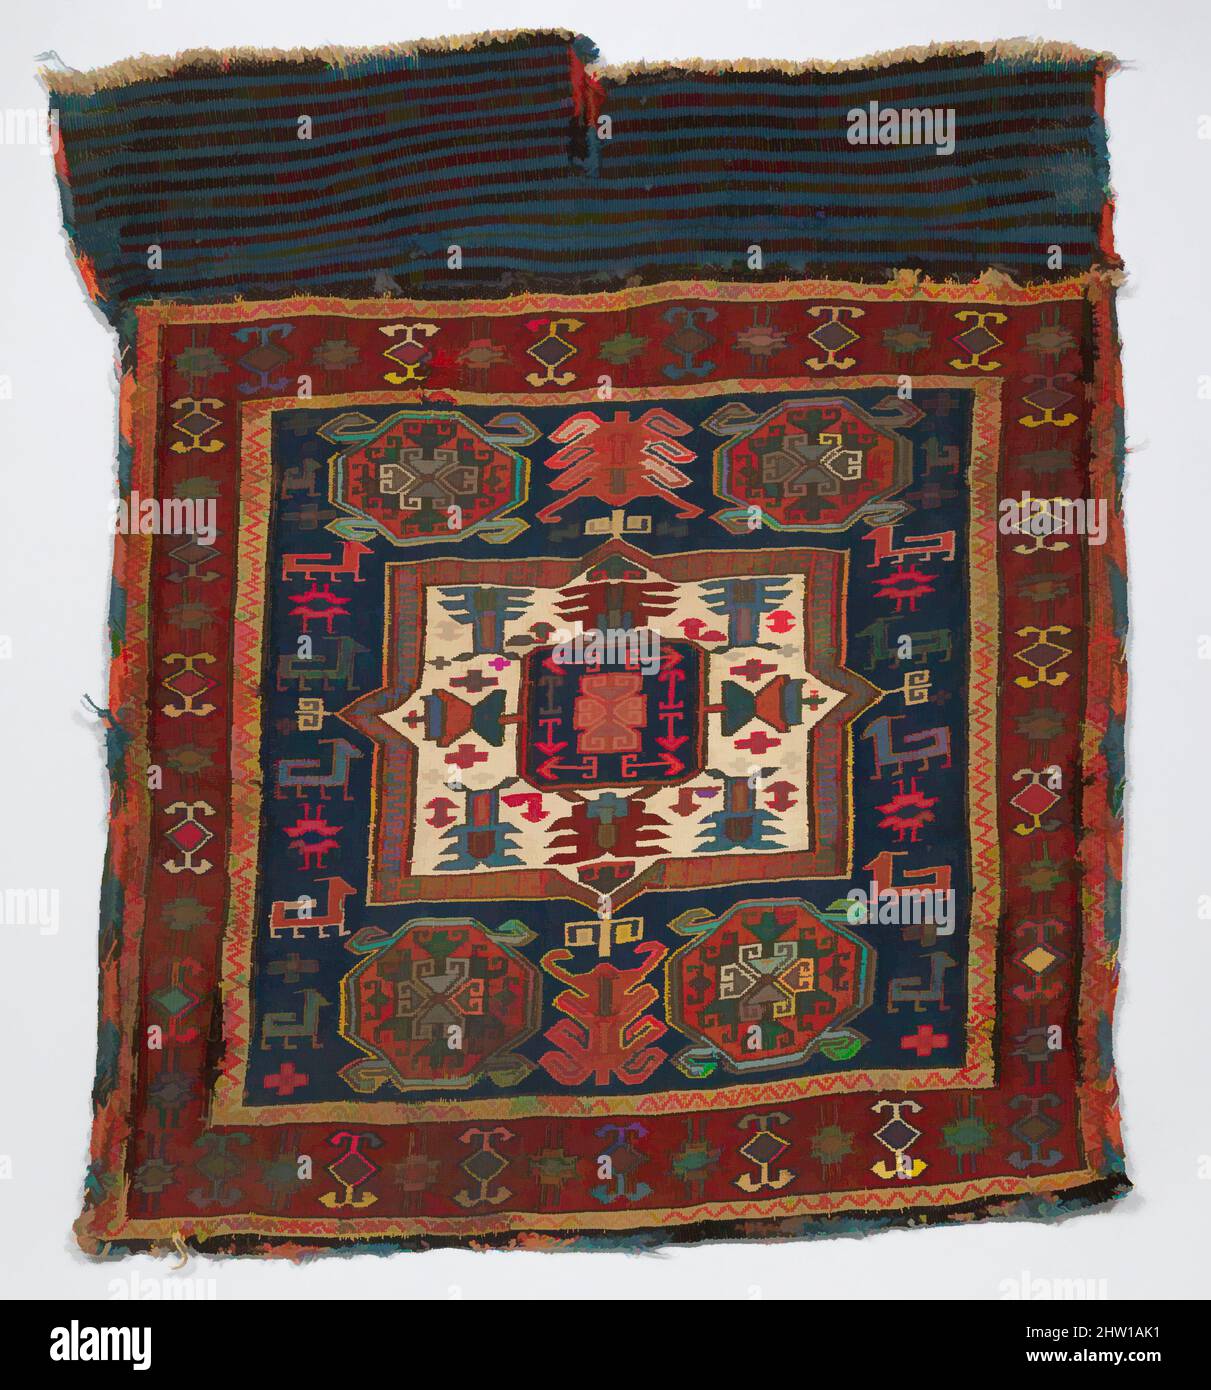 https://c8.alamy.com/comp/2HW1AK1/art-inspired-by-half-of-double-saddle-bag-khorjin-ca-1850-country-of-origin-northwestern-iran-wool-sumak-brocaded-slit-tapestry-weave-h-26-in-66-cm-textiles-woven-brocade-classic-works-modernized-by-artotop-with-a-splash-of-modernity-shapes-color-and-value-eye-catching-visual-impact-on-art-emotions-through-freedom-of-artworks-in-a-contemporary-way-a-timeless-message-pursuing-a-wildly-creative-new-direction-artists-turning-to-the-digital-medium-and-creating-the-artotop-nft-2HW1AK1.jpg